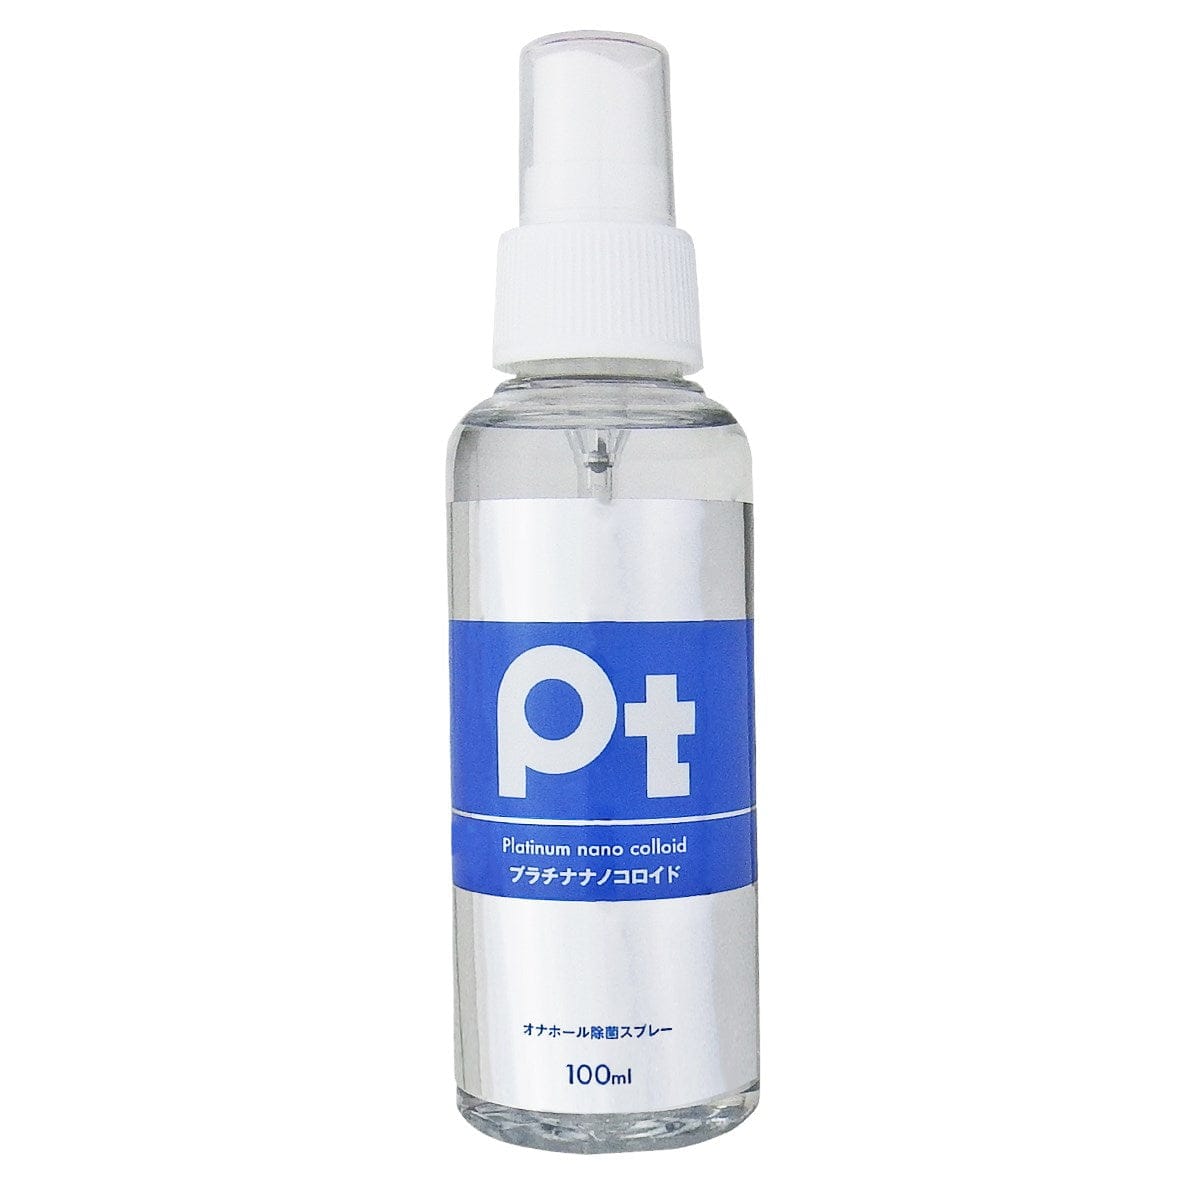 SSI Japan - Pt Platinum Nano Colloid Disinfecting Spray Toy Cleaner 100ml -  Toy Cleaners  Durio.sg